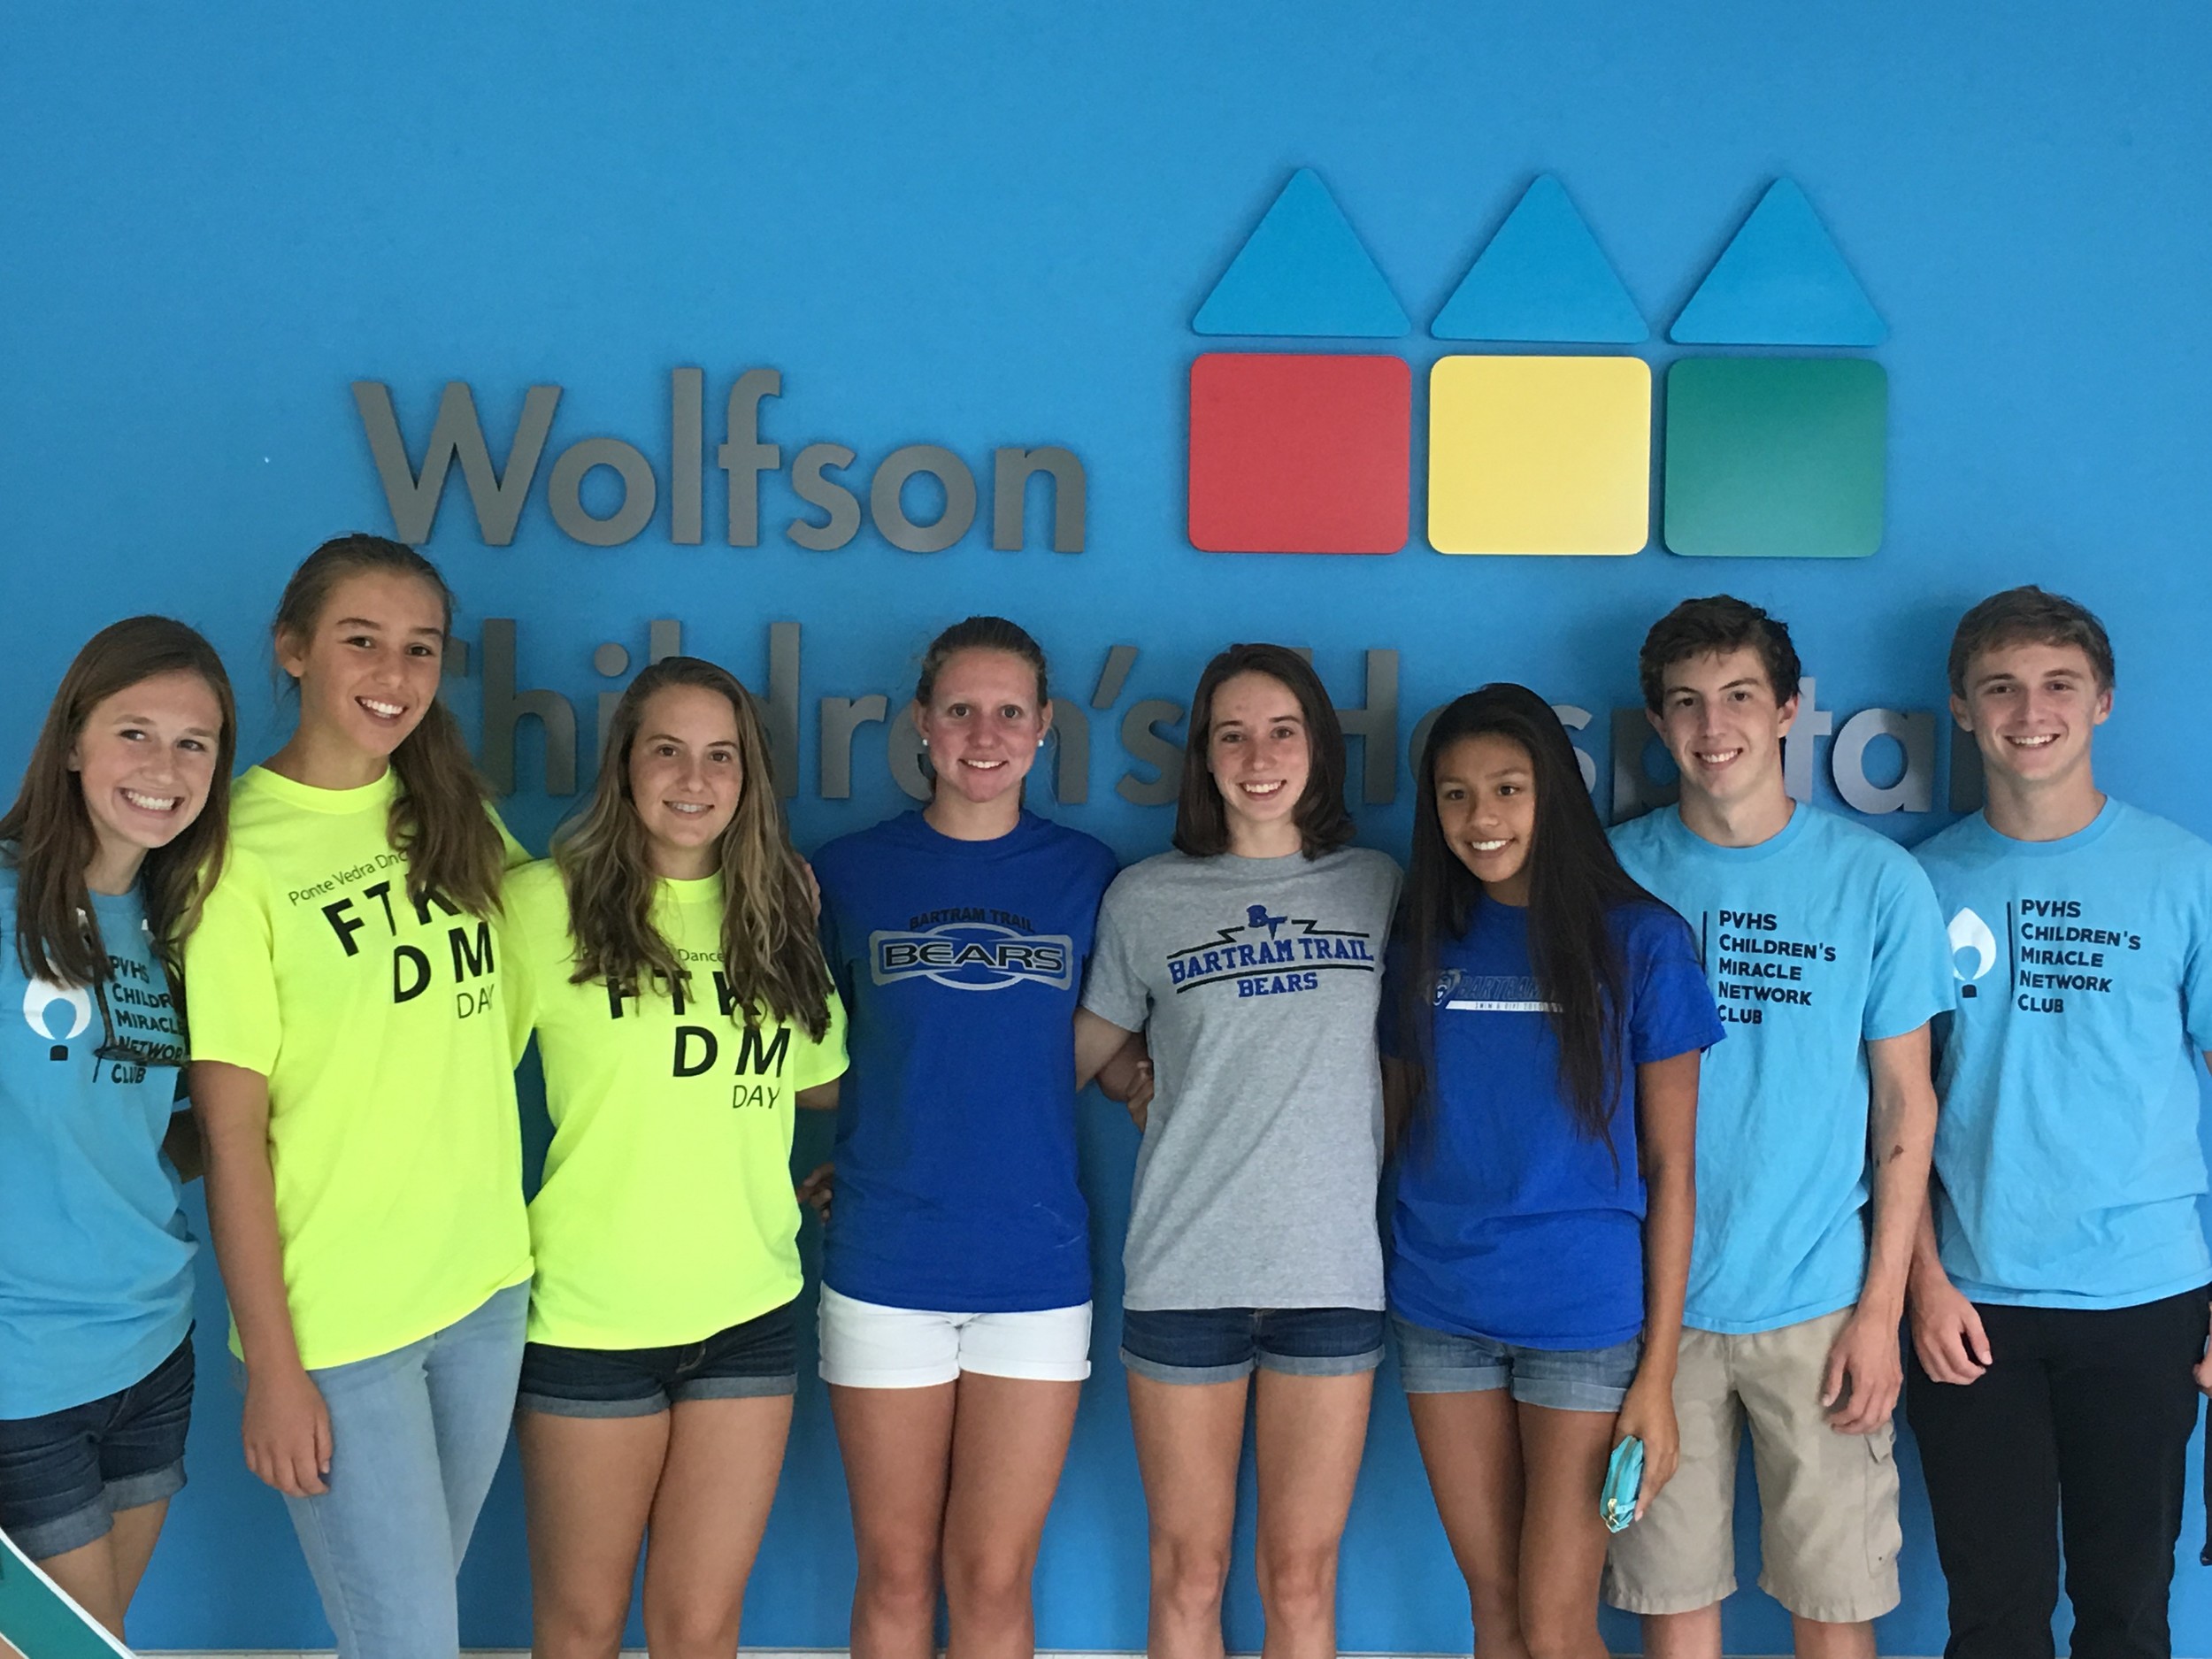 Children’s Miracle Network Club members Anna Grace Pahlow, Kaitlyn Copeland, Riley Hagy, Summer Stanfield, Lilly McCabe, Amelia Tayag, Jesse Hagy and John Hughs